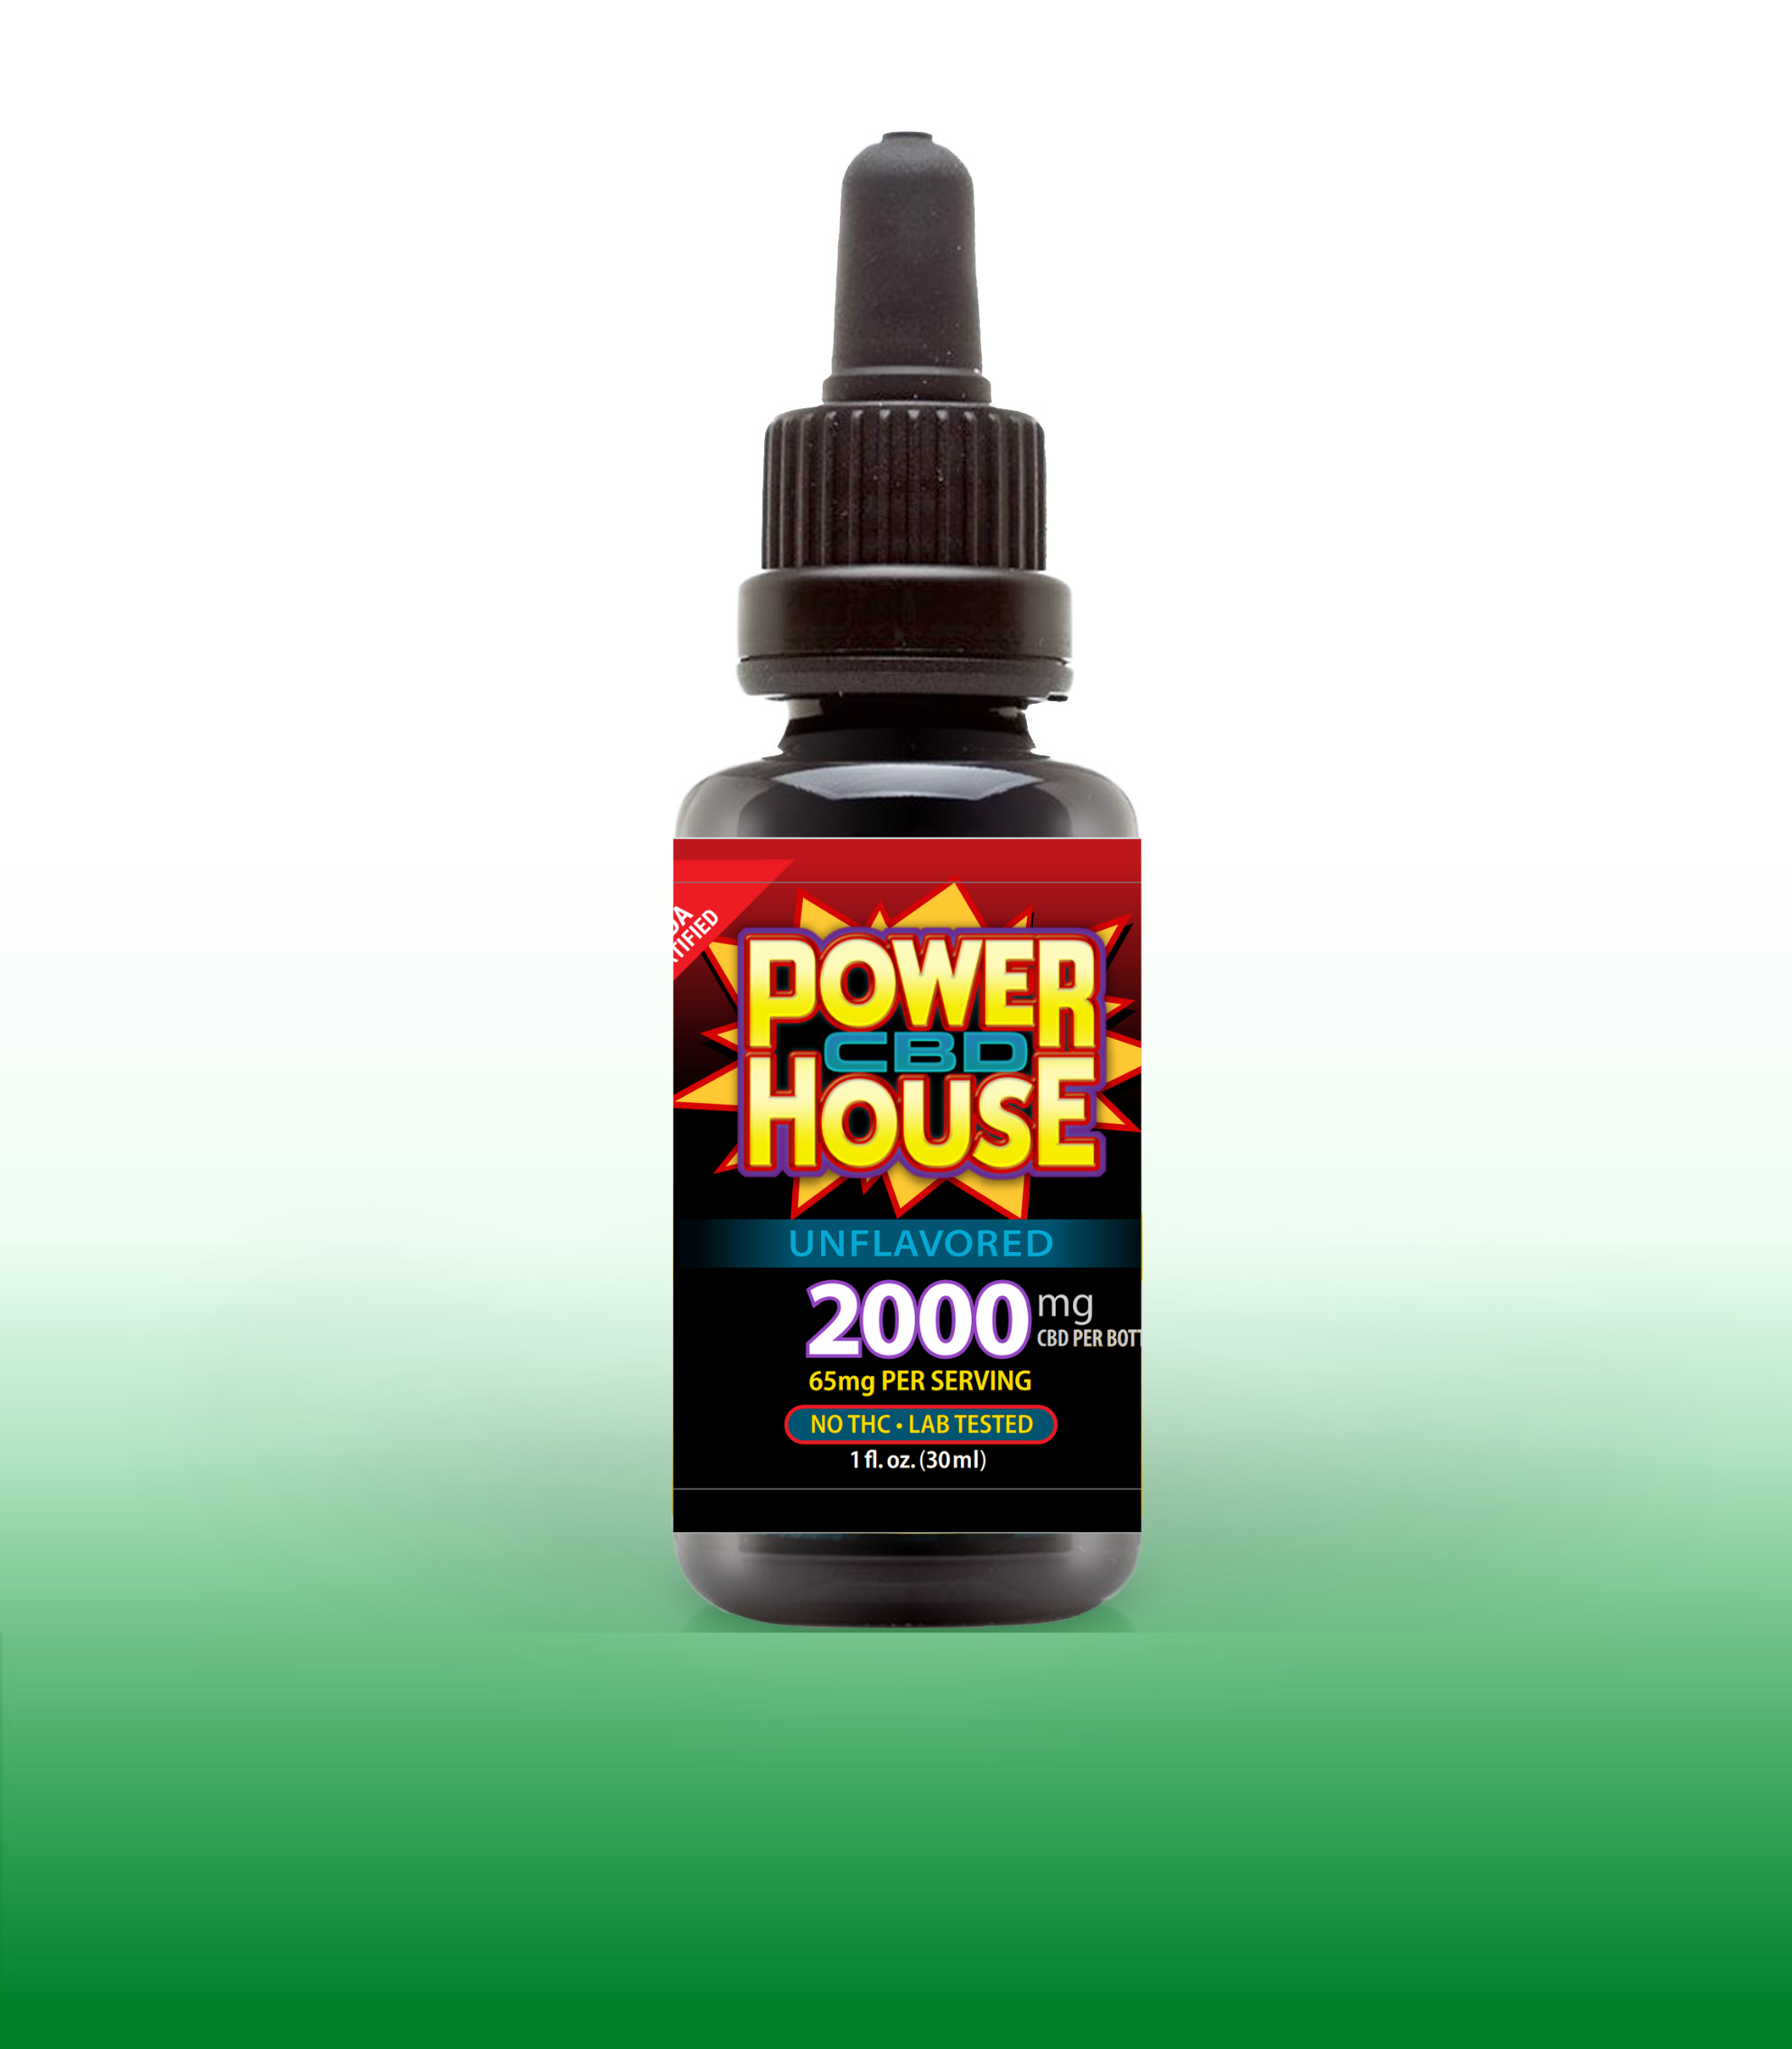 Powerhouse by Cali-Born Dreams – Unflavored CBD Tinctures – 2000mg (65mg per serving) – 30mL Dropper Bottle